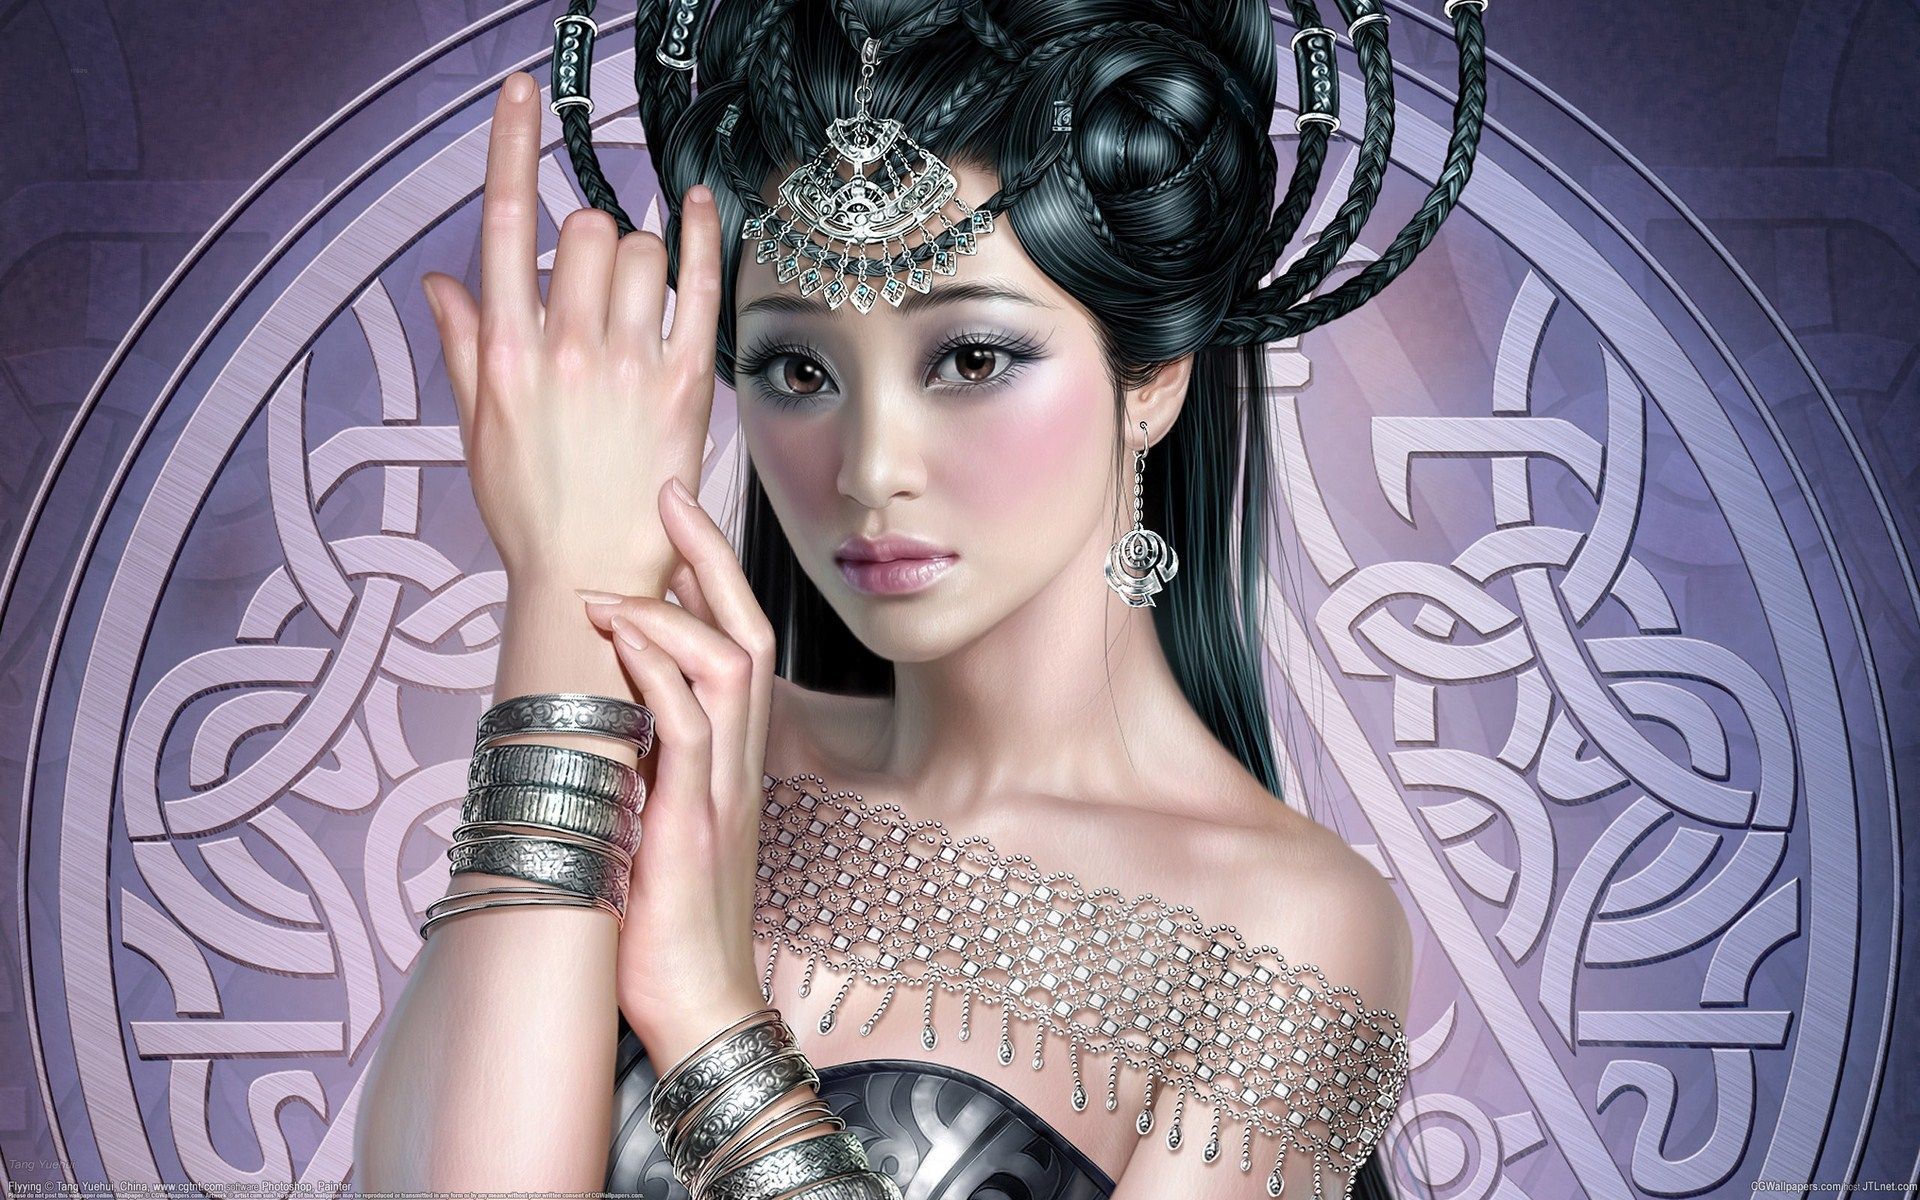 Wallpaper art, tang yuehui, girl, asian, jewelry, bracelets, hair, braids wallpaper rendering. Seres mitologicos, Mitologico